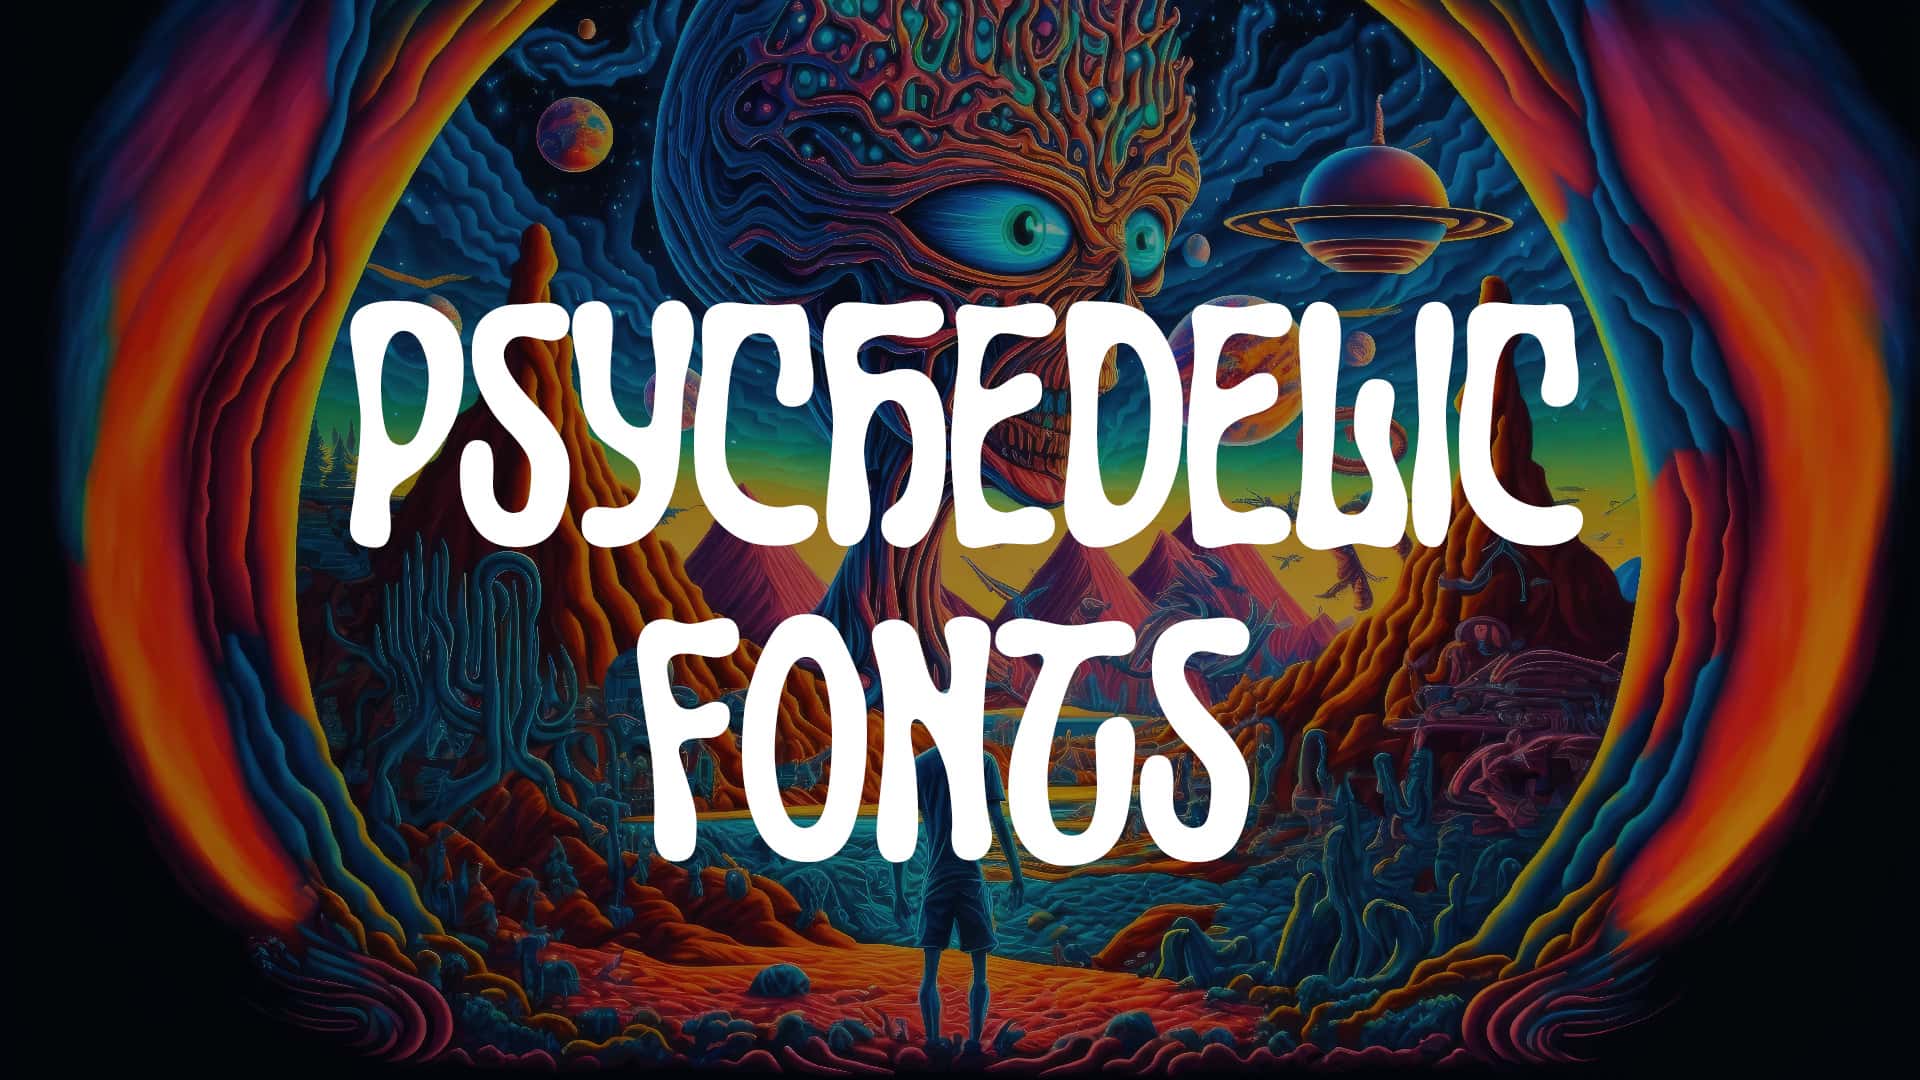 36 Psychedelic Fonts To Create Mind-Blowing Designs | HipFonts